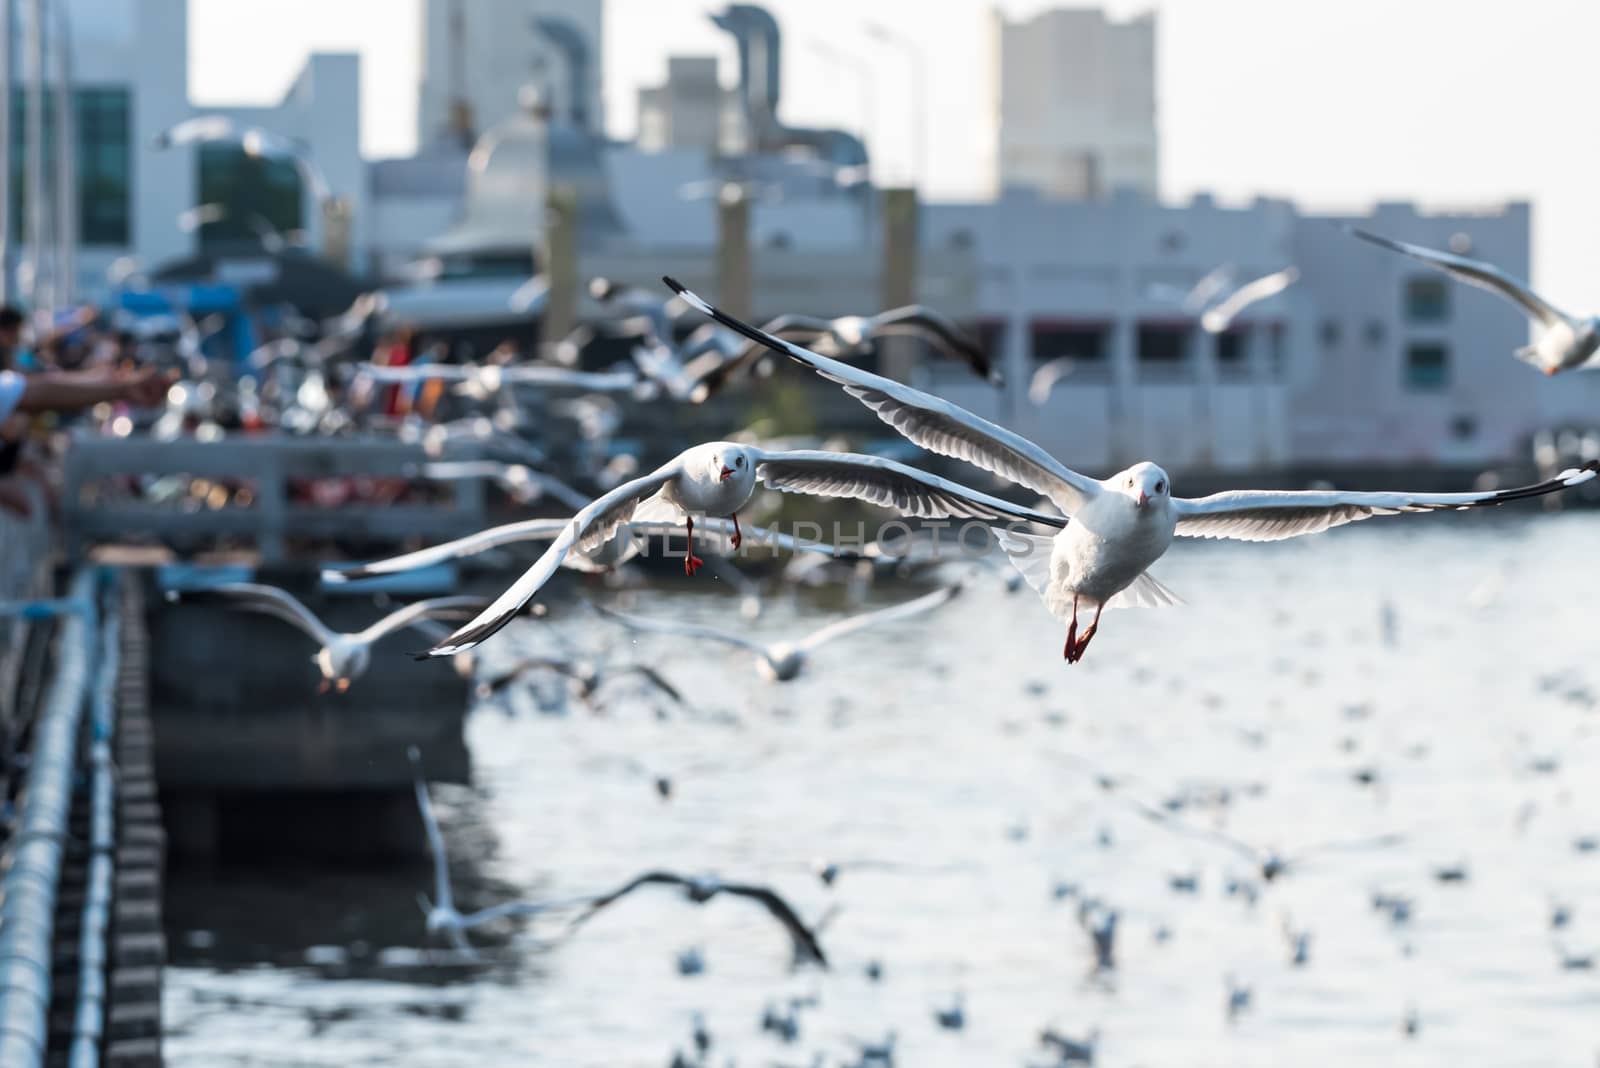 Bang Pu provides habitat for large flocks of migratory seagulls annually in the early winter visitors can enjoy with feeding thousands of seagulls